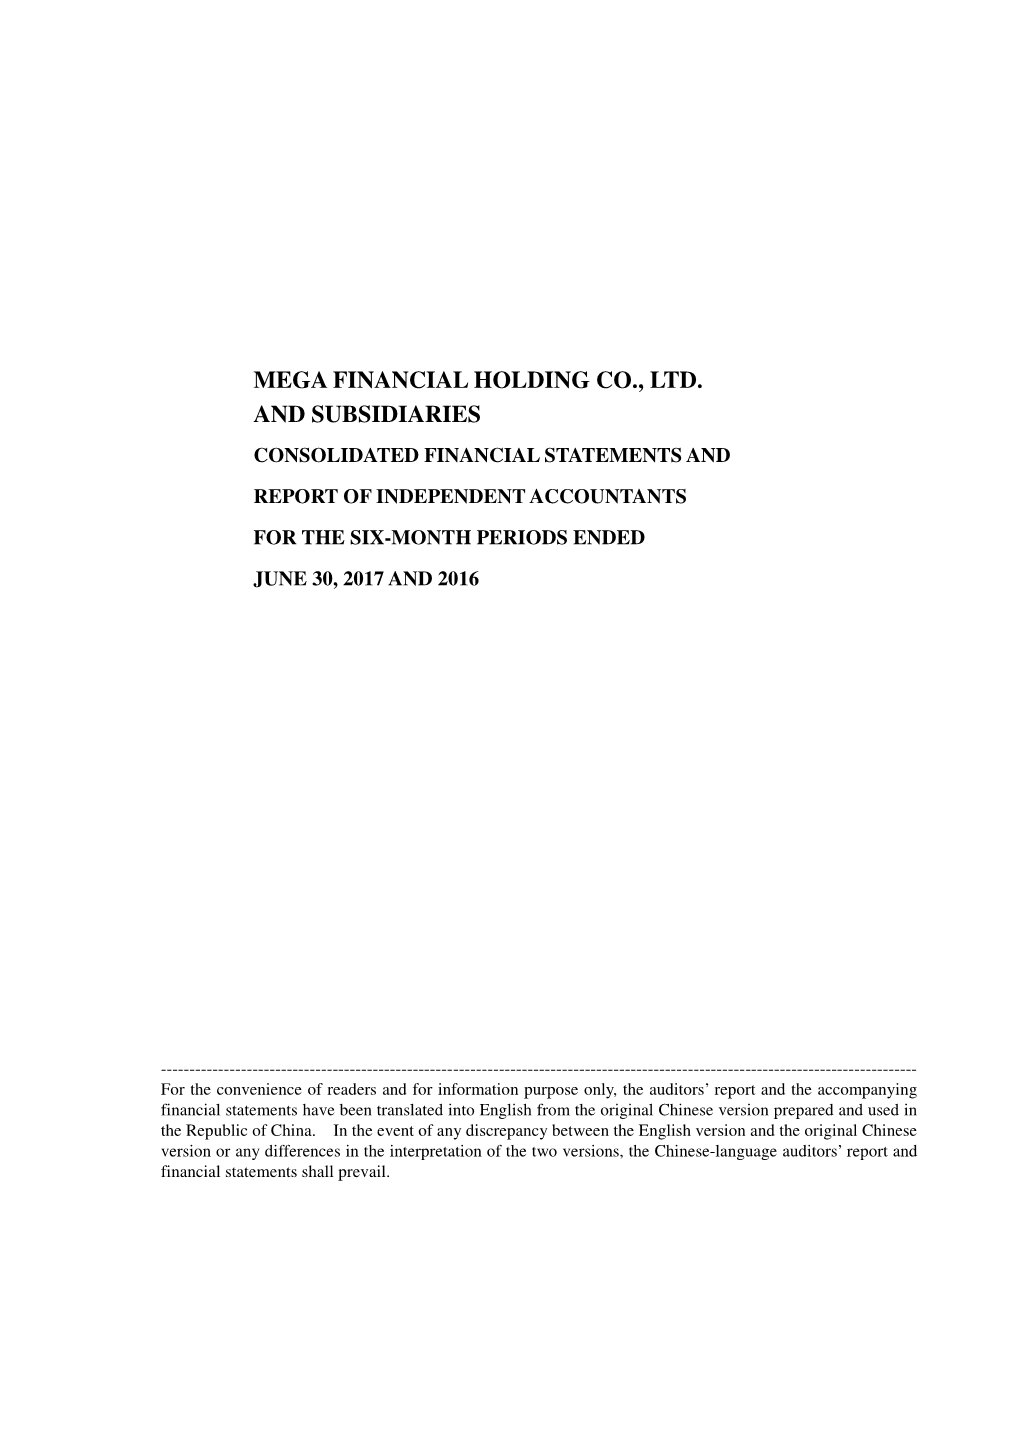 Mega Financial Holding Co., Ltd. and Subsidiaries Consolidated Financial Statements and Report of Independent Accountants